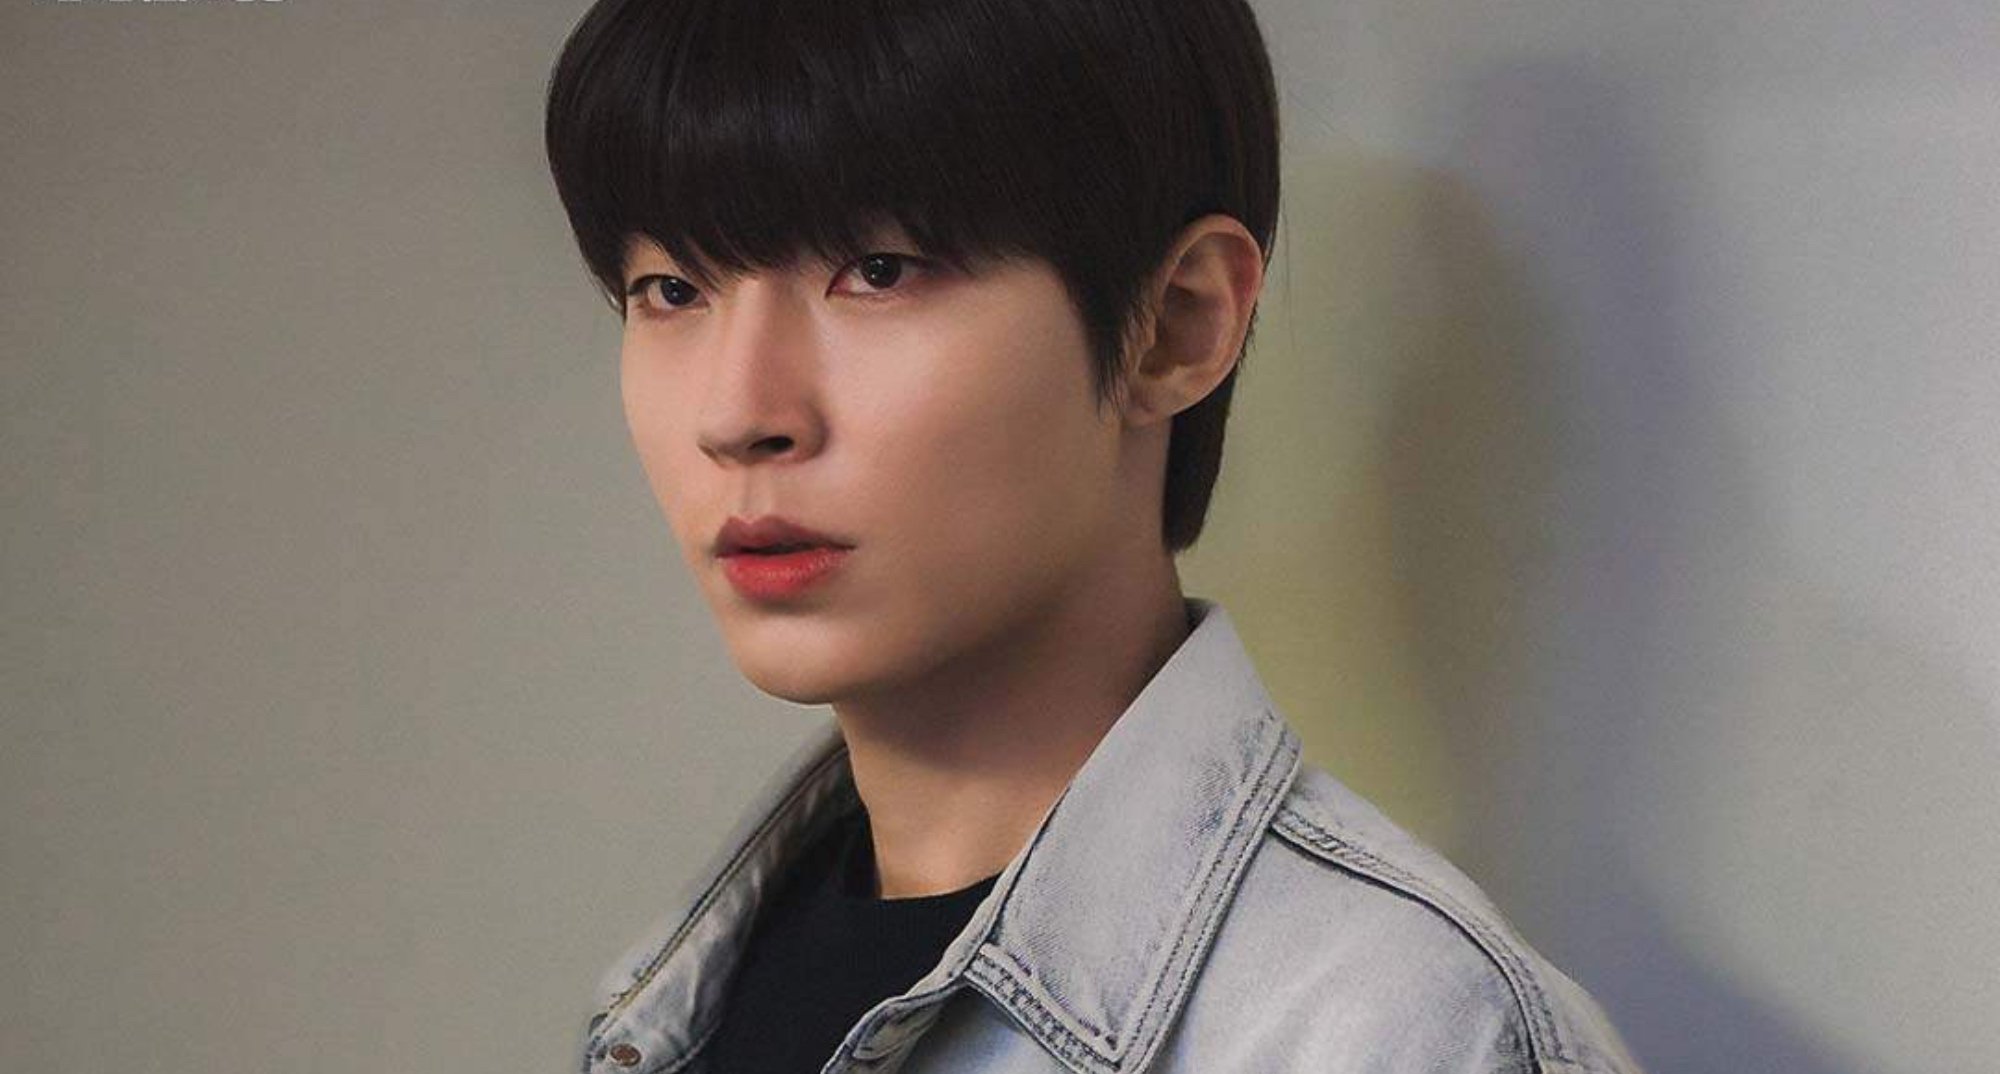 Hwang In-youp as Gong Chan in 'Why Her?' wearing black shirt and jean jacket.